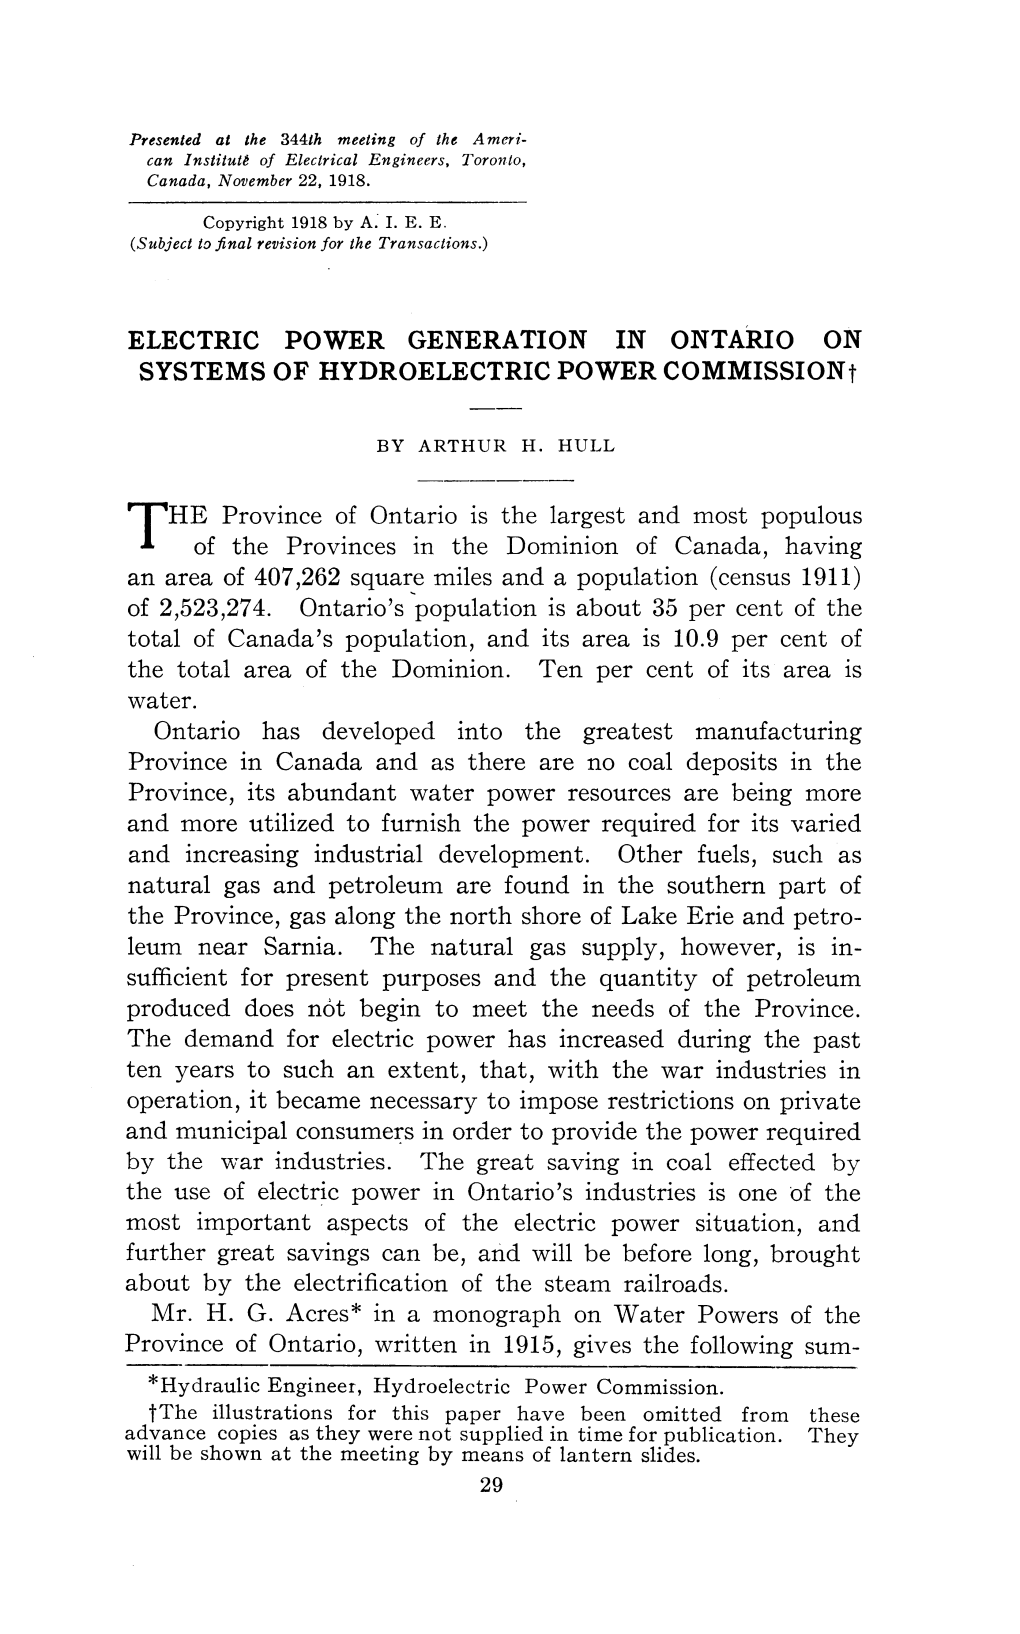 Electric Power Generation in Ontario on Systems of Hydroelectric Power Commission!